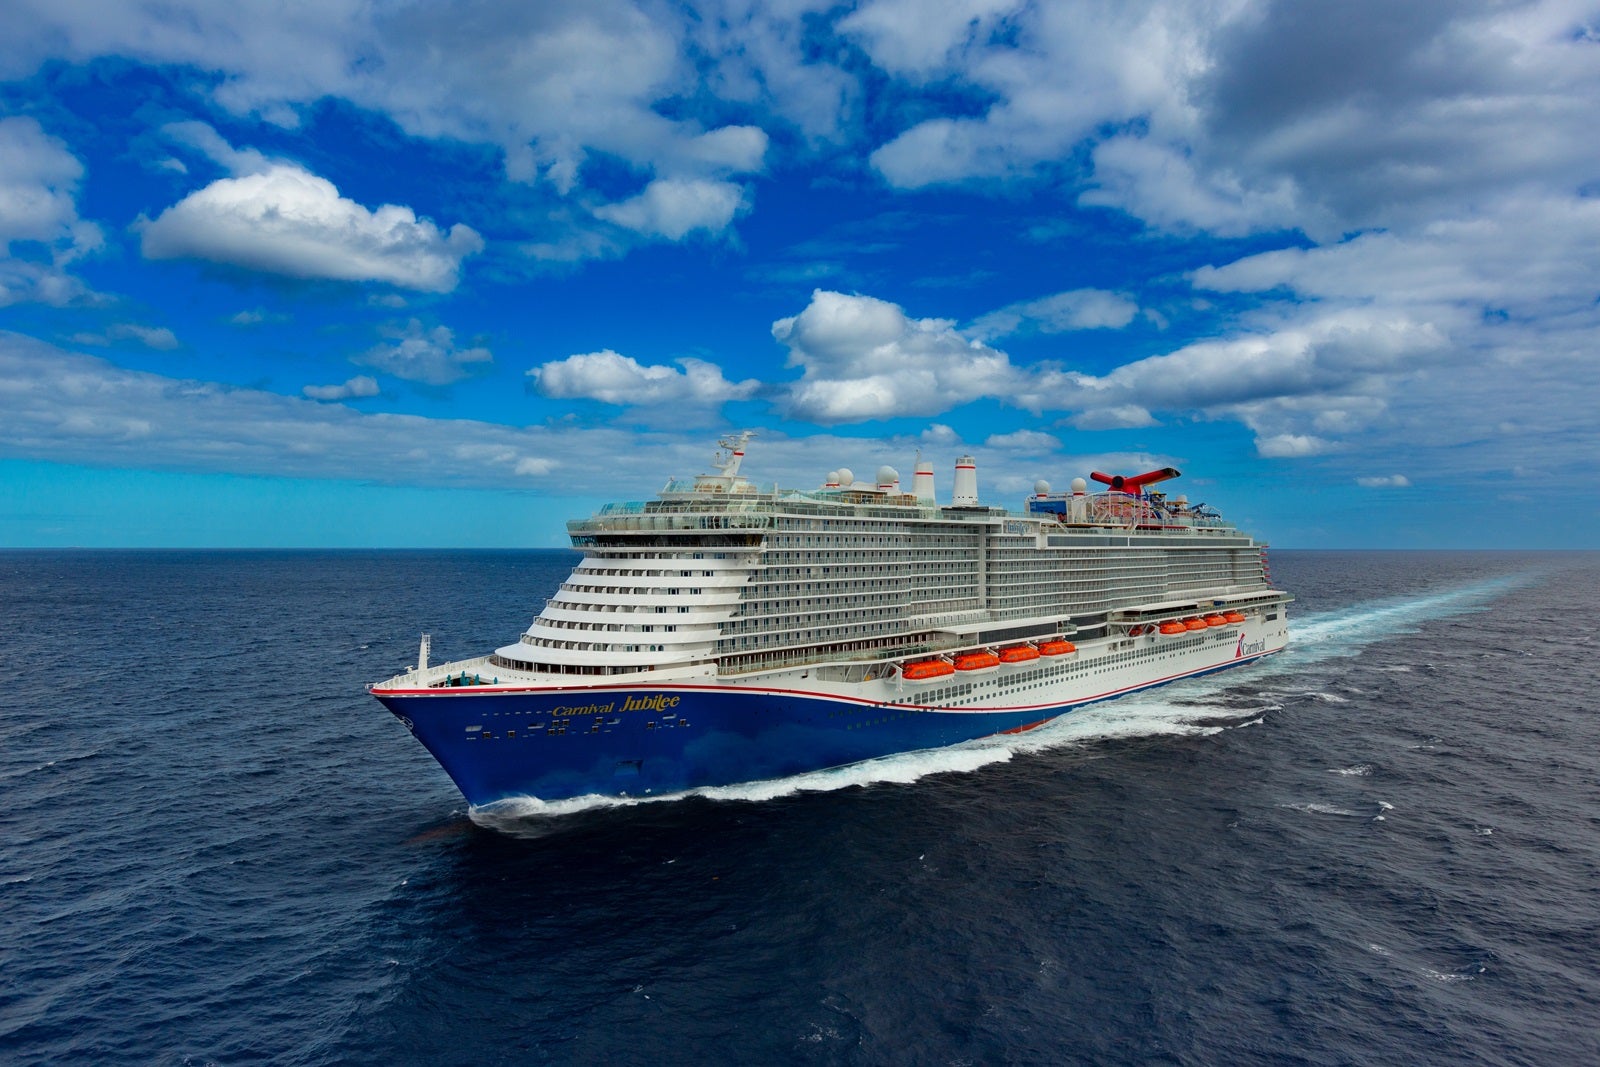 A cruise ship with a blue hull sailing on blue water in front of a blue sky with white clouds